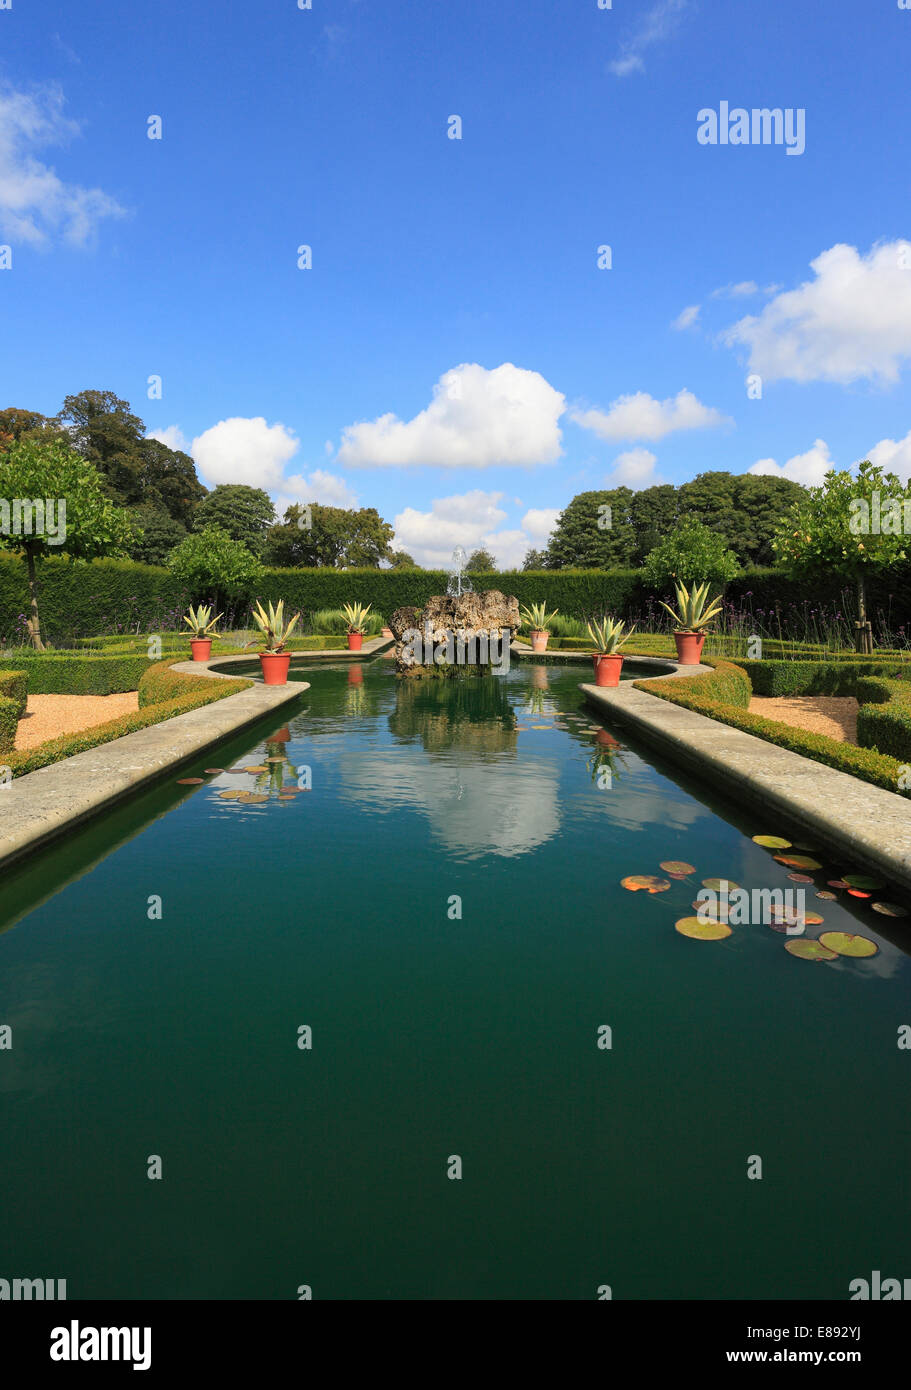 Water garden in the gardens at Houghton Hall, Norfolk, England, UK. Stock Photo